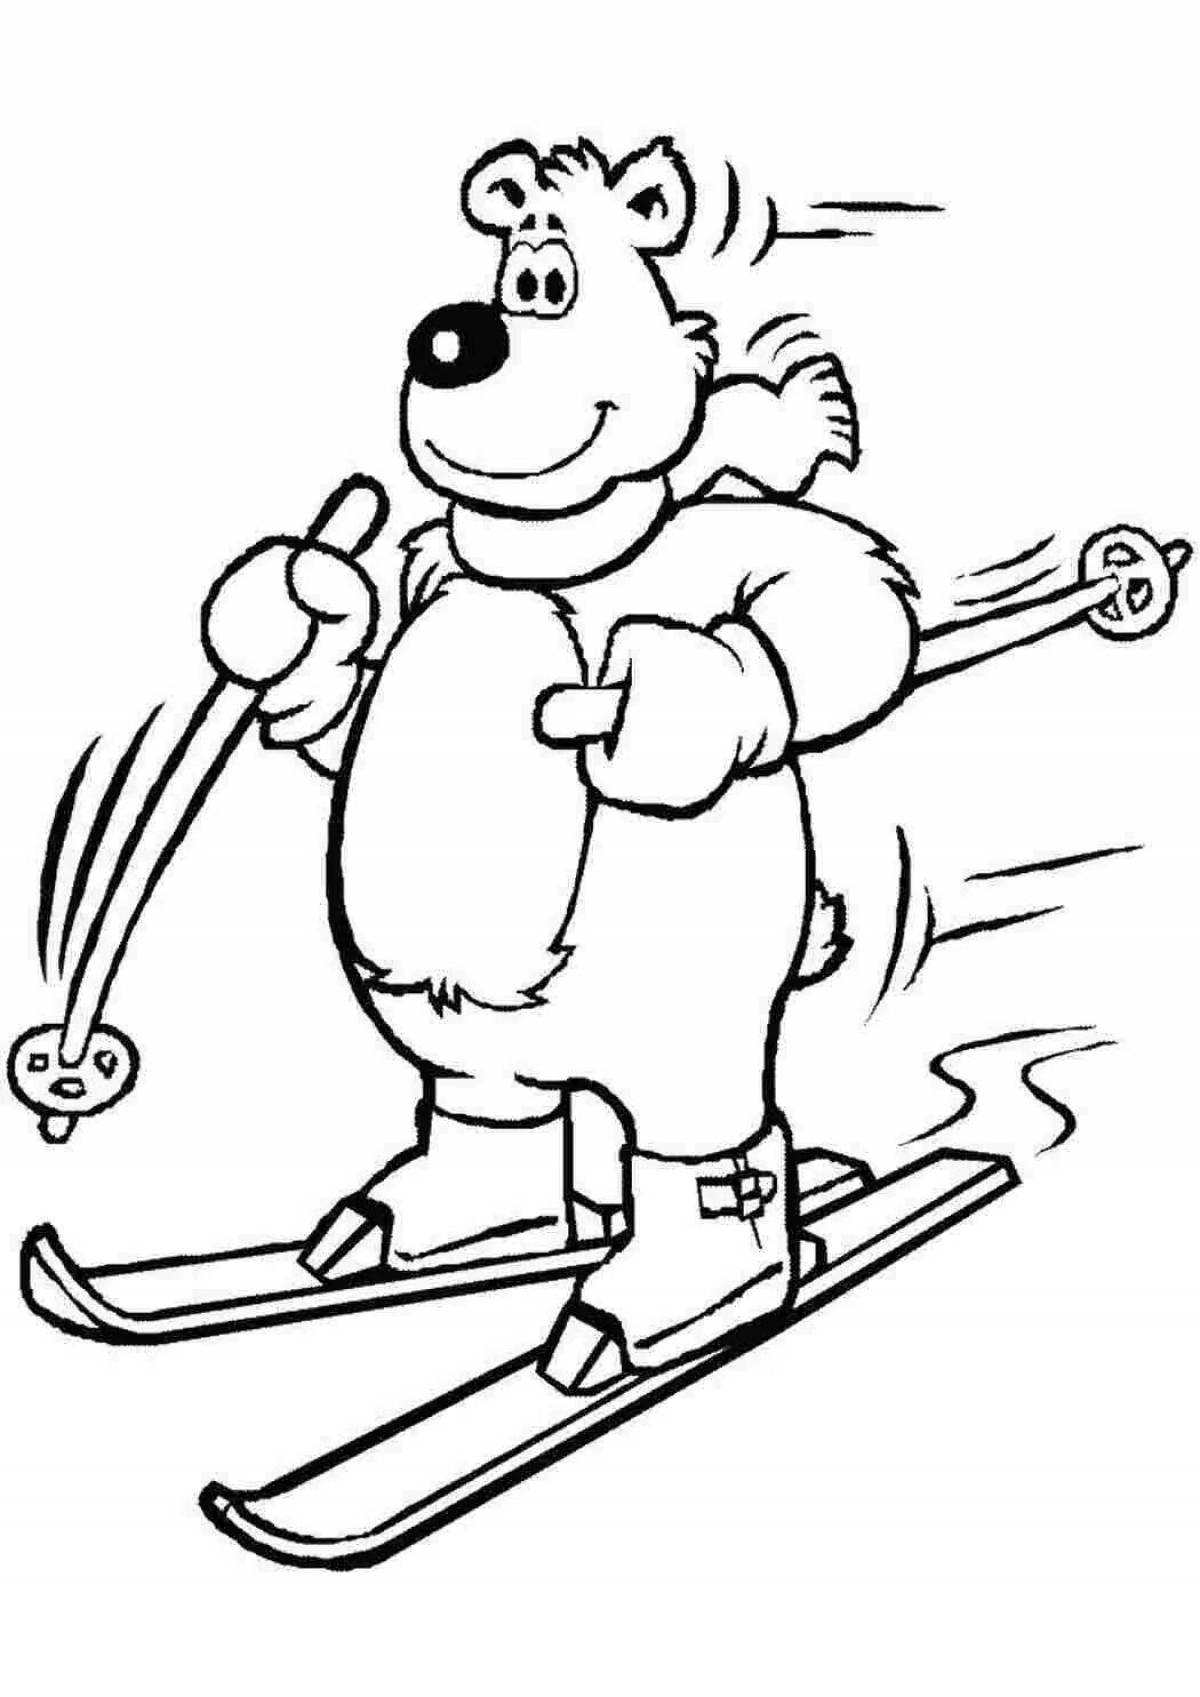 Skier coloring book for kids 5-6 years old